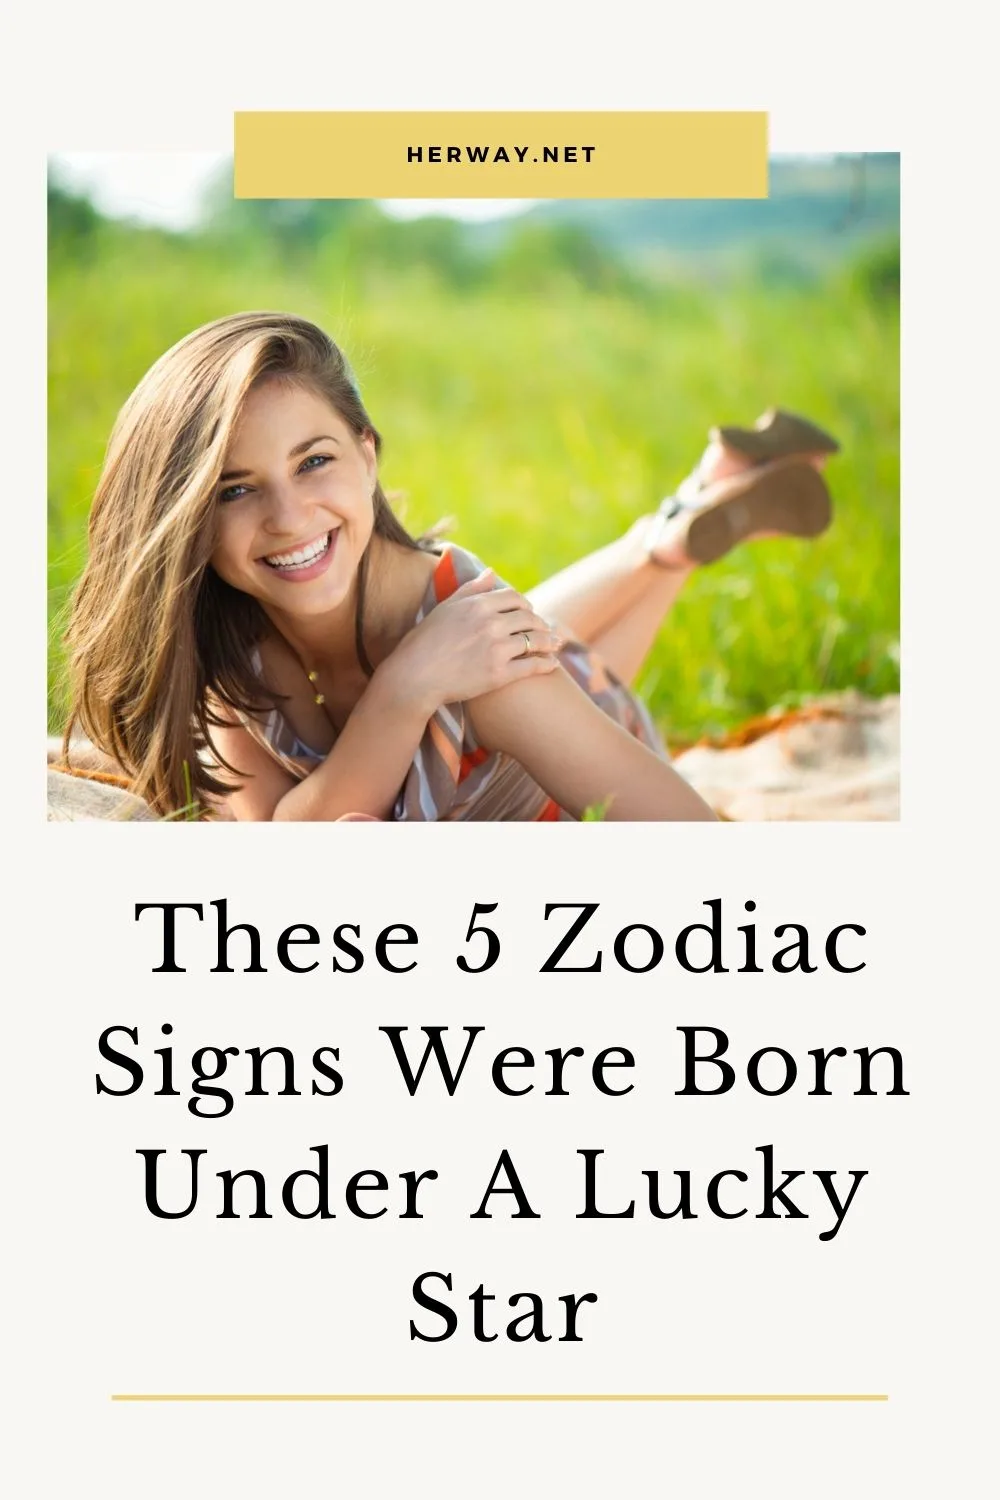 These 5 Zodiac Signs Were Born Under A Lucky Star